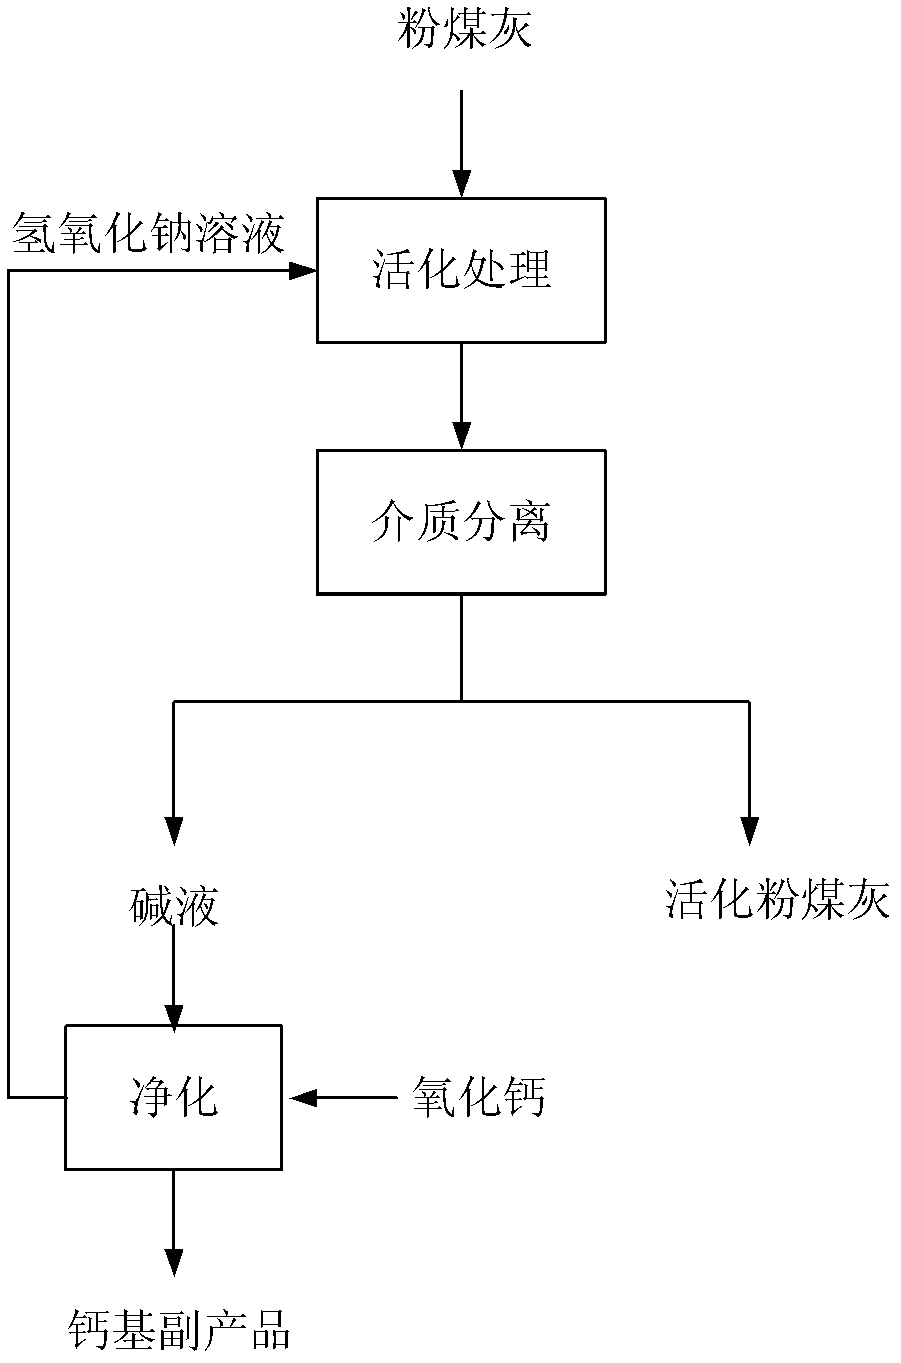 Fly ash low-temperature wet activating treatment method